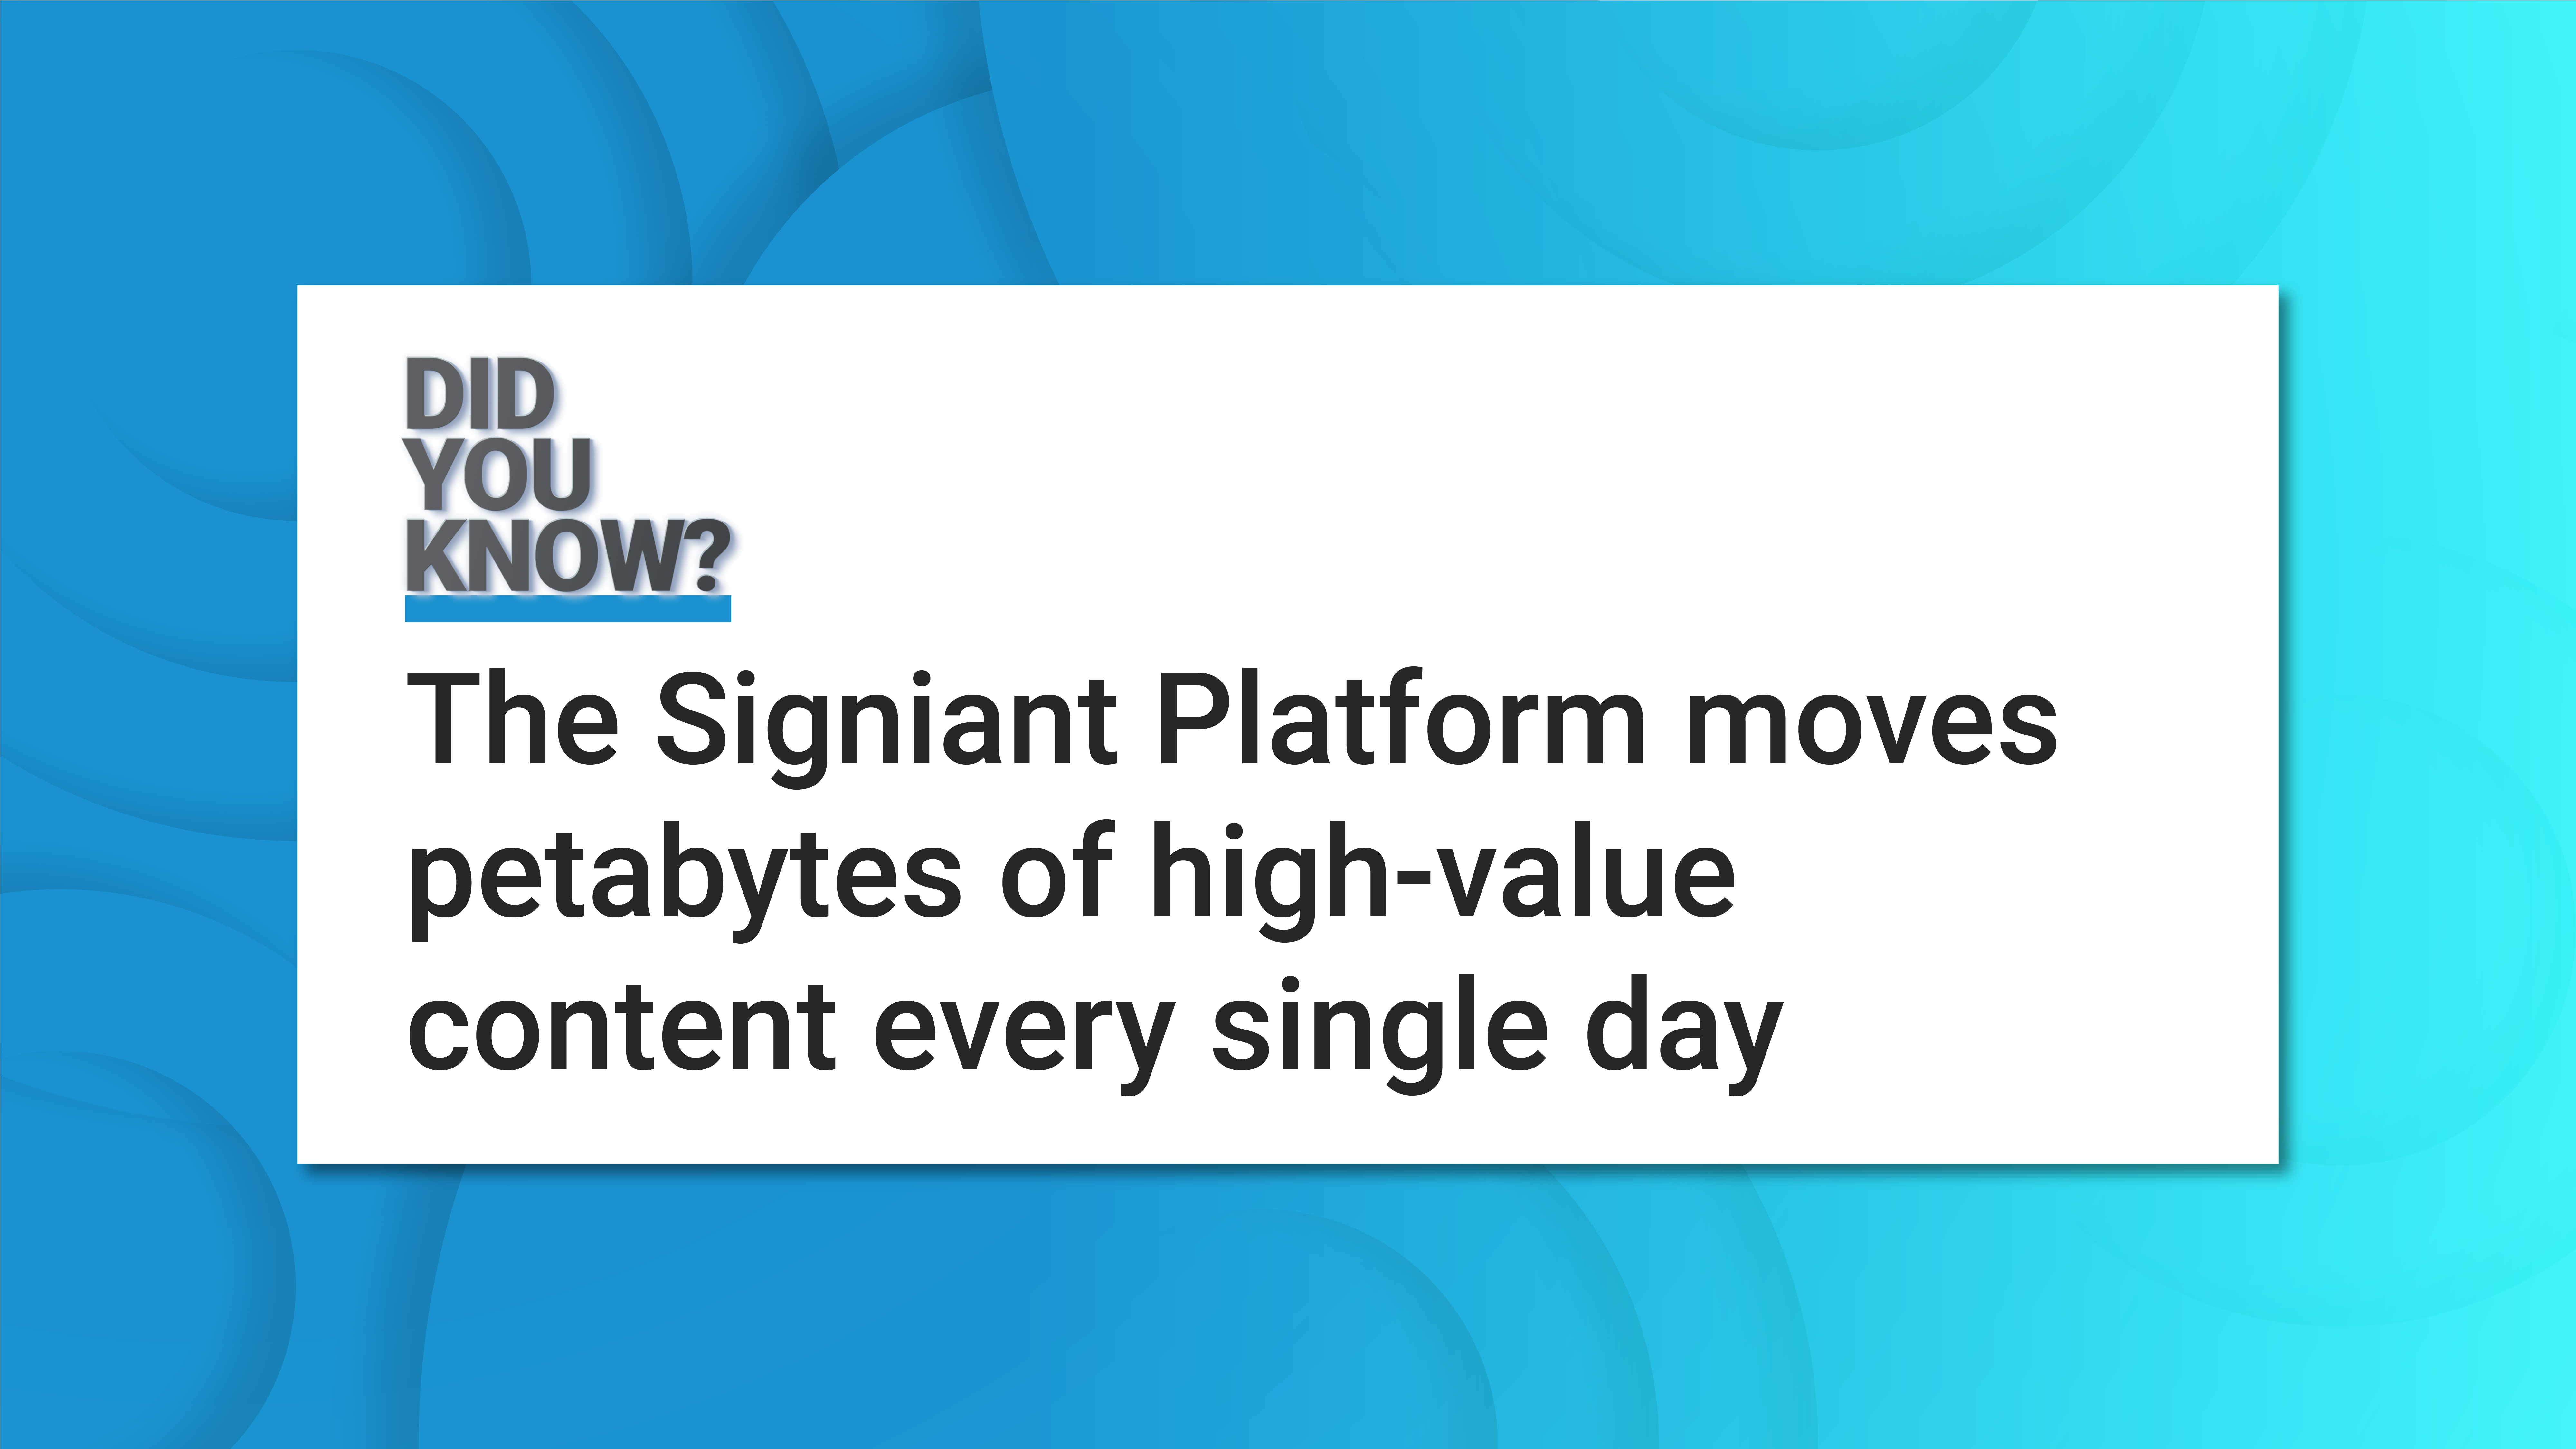 Did you know? The Signiant Platform moves petrabytes of high-value content every single day